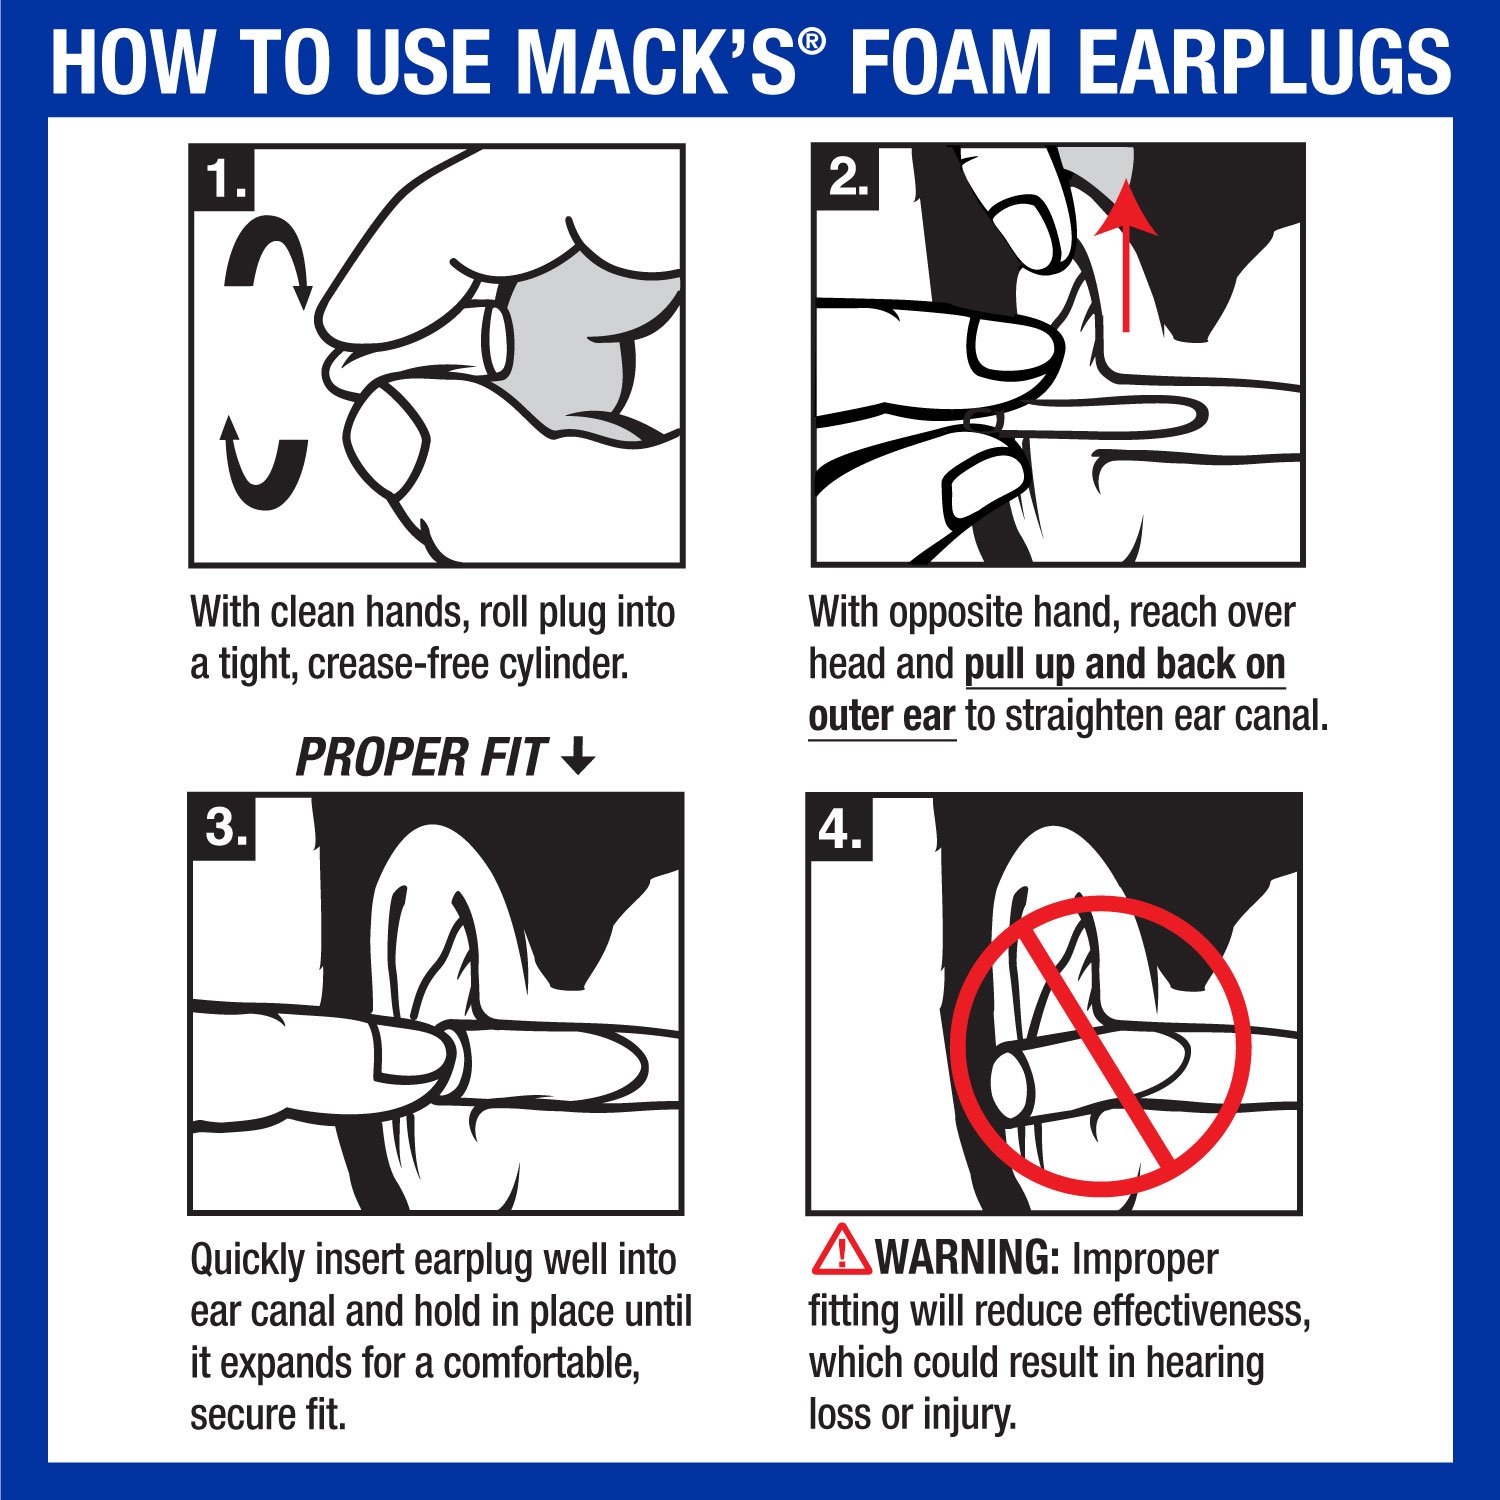 Mack's Dreamgirl Soft Foam Earplugs, 50 Pair, Pink - Small Ear Plugs for Sleeping, Snoring, Studying, Loud Events, Traveling & Concerts